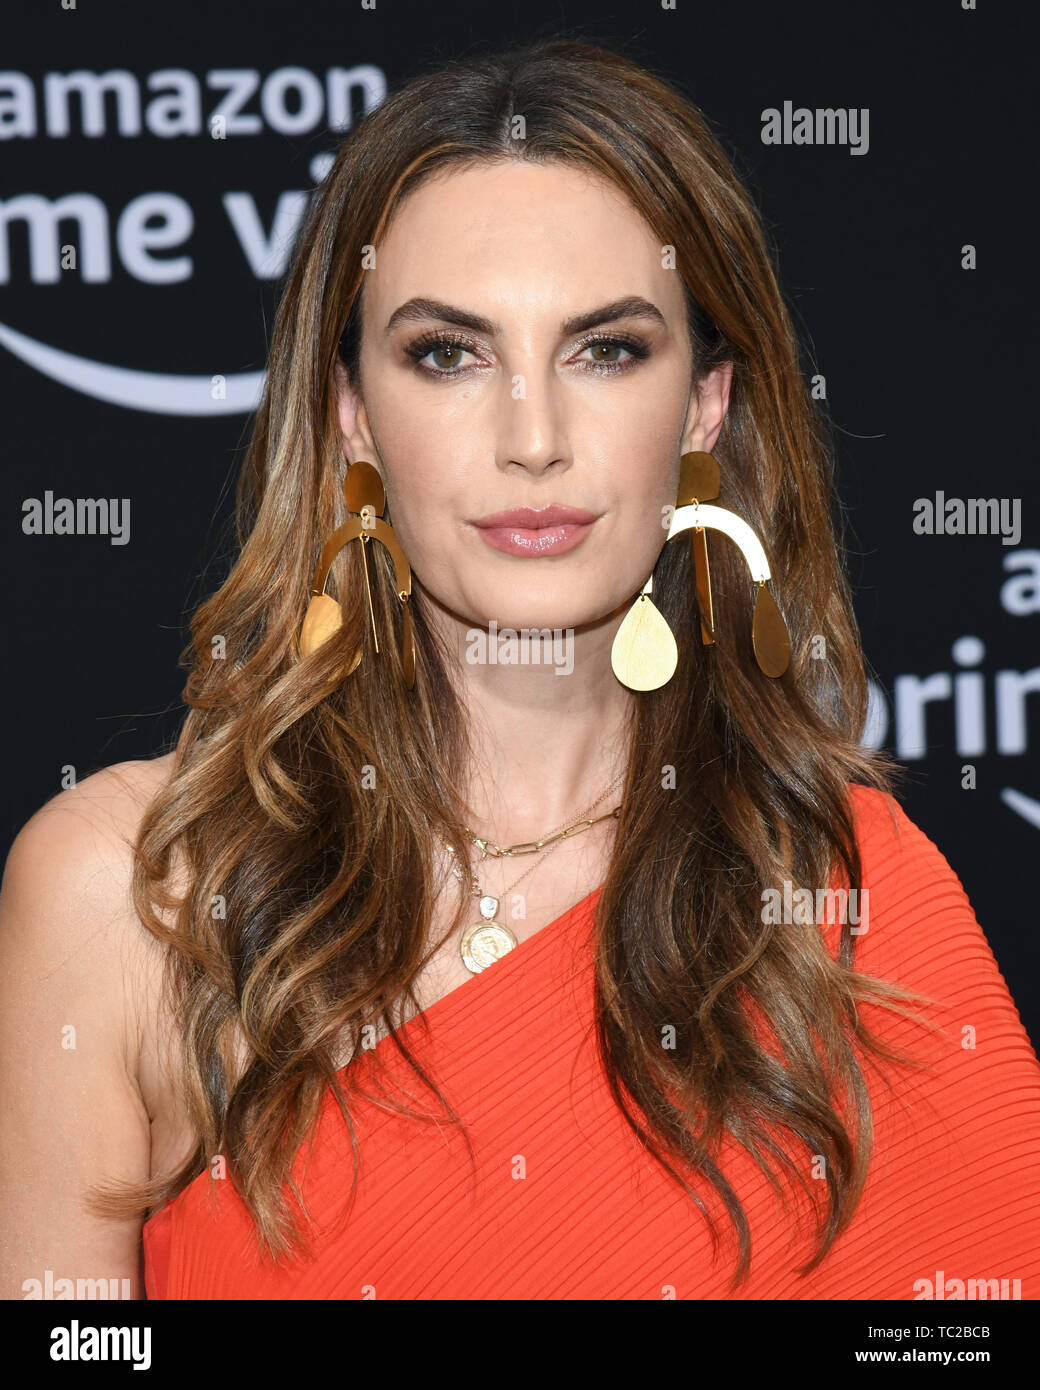 June 3, 2019 - Westwood, California, USA - 02, June 2019 - Westwood Village, California. Elizabeth Chambers attends Premiere Of Amazon Prime Video's 'Chasing Happiness' at the Regency Village Bruin Theatre. (Credit Image: © Billy Bennight/ZUMA Wire) Stock Photo